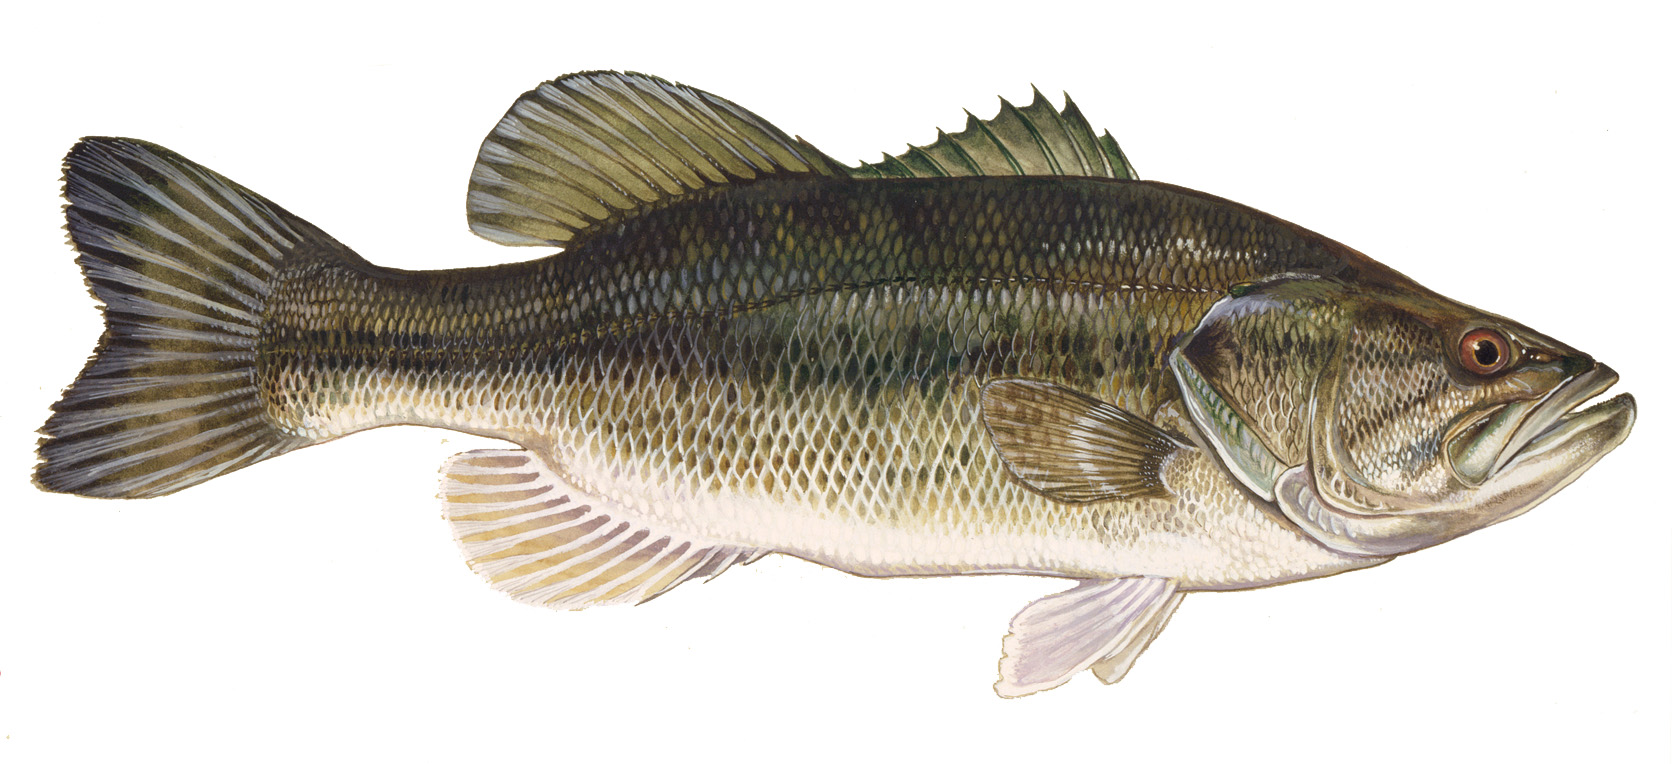 Bass Fish Photo And Wallpaper Cute Pictures